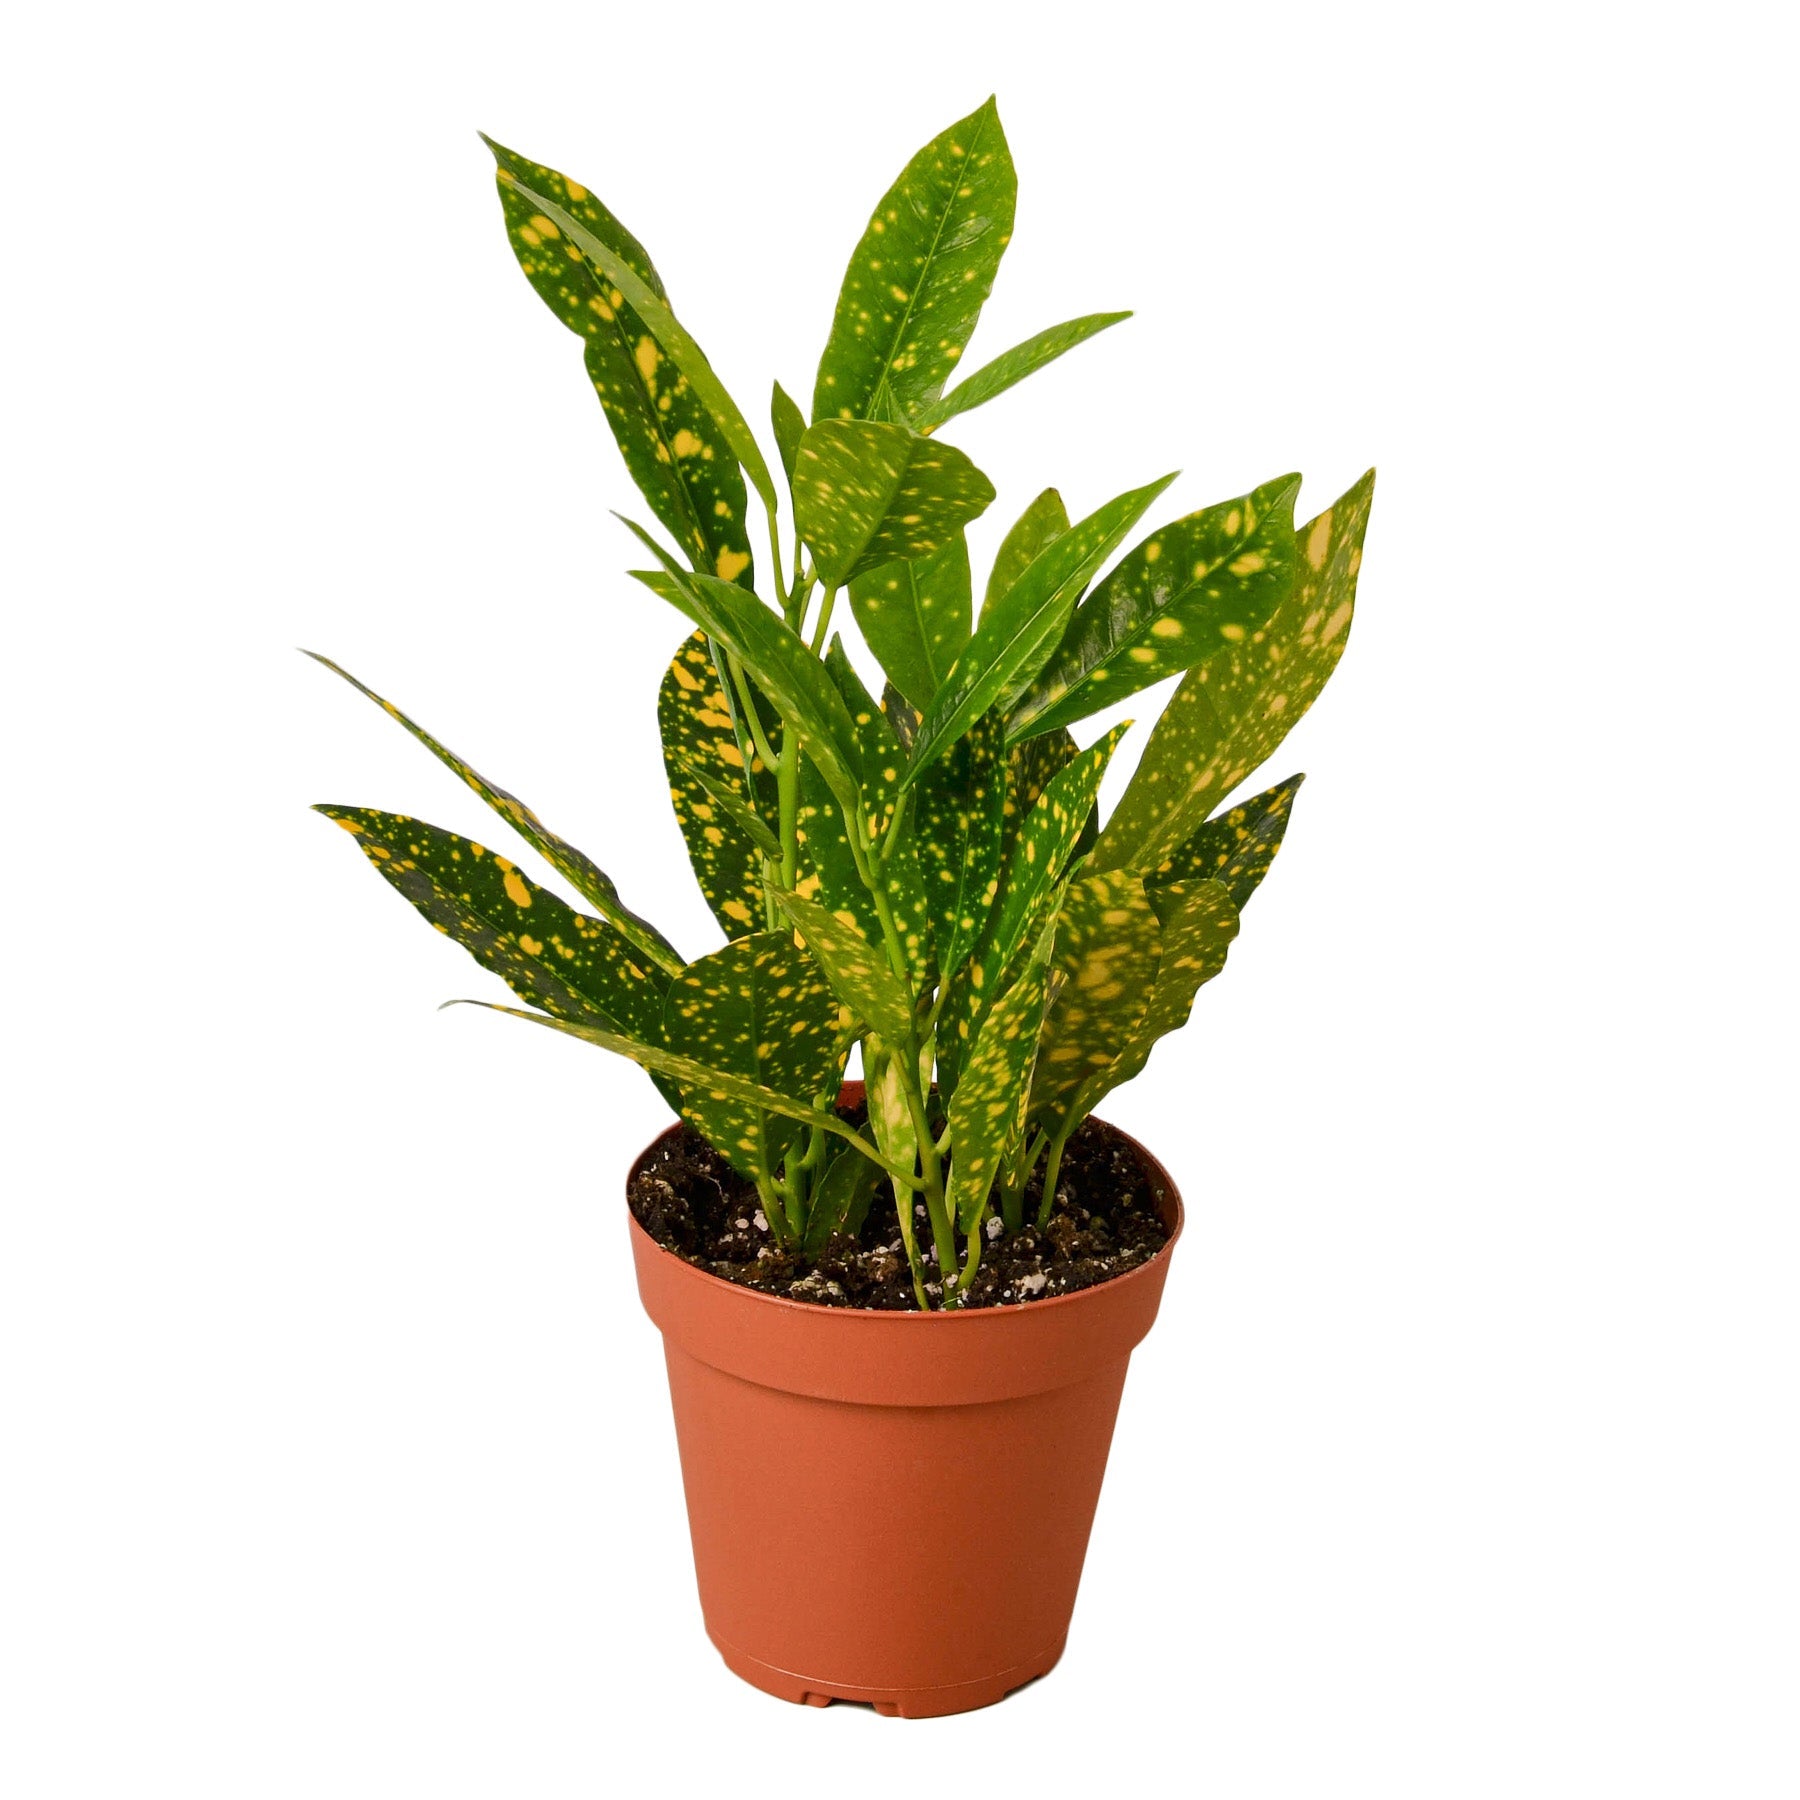 A potted plant with yellow spots on it, available at the best garden center near me.